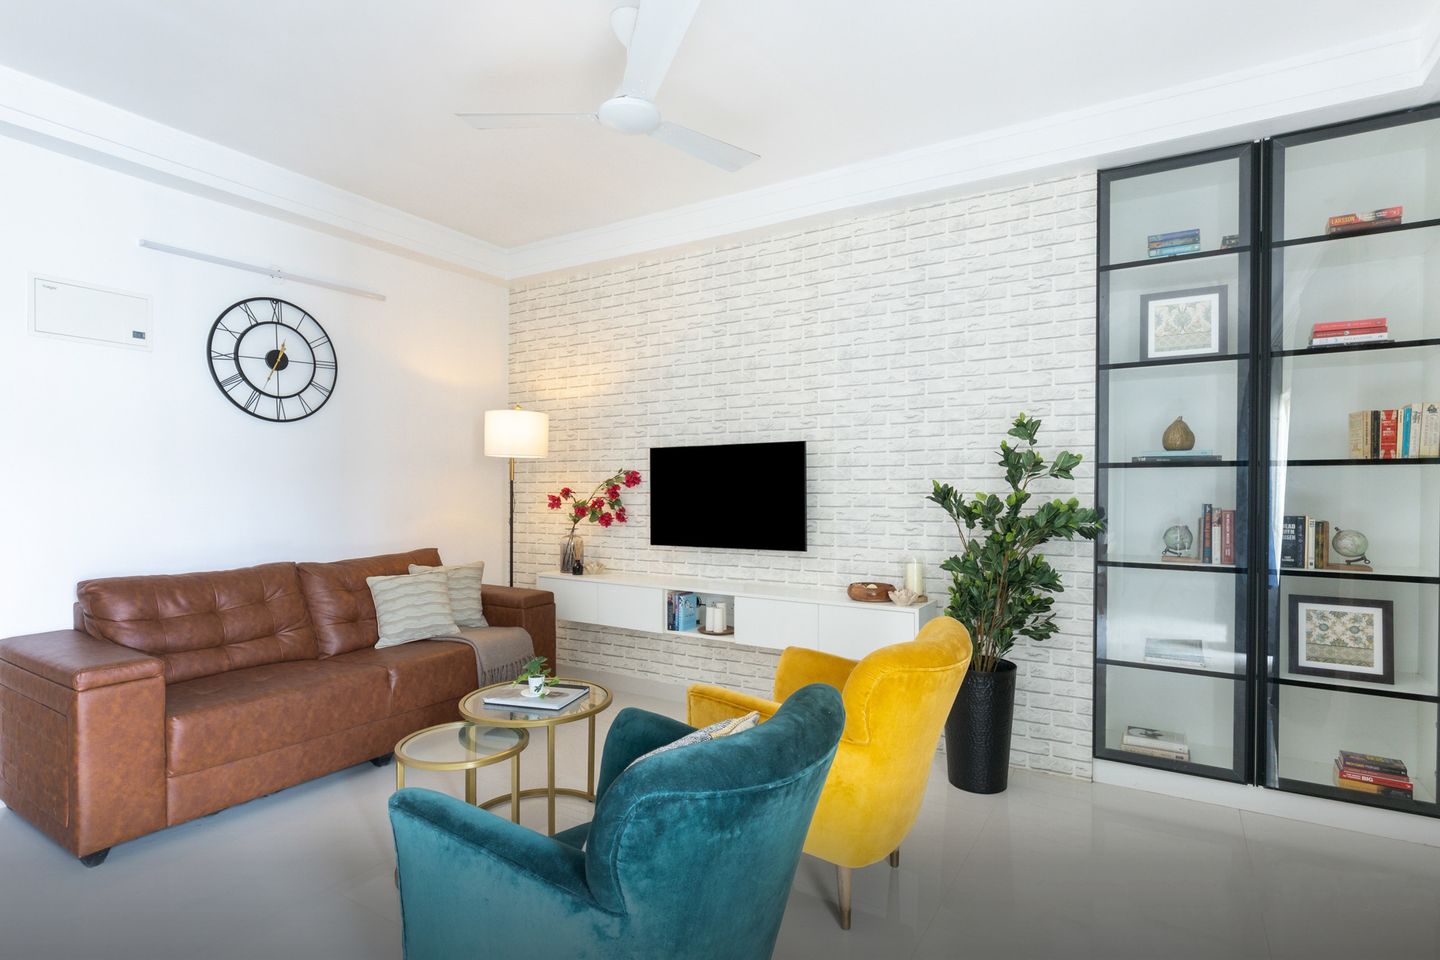 Large white living room design with white brick wall and accent chairs - Livspace